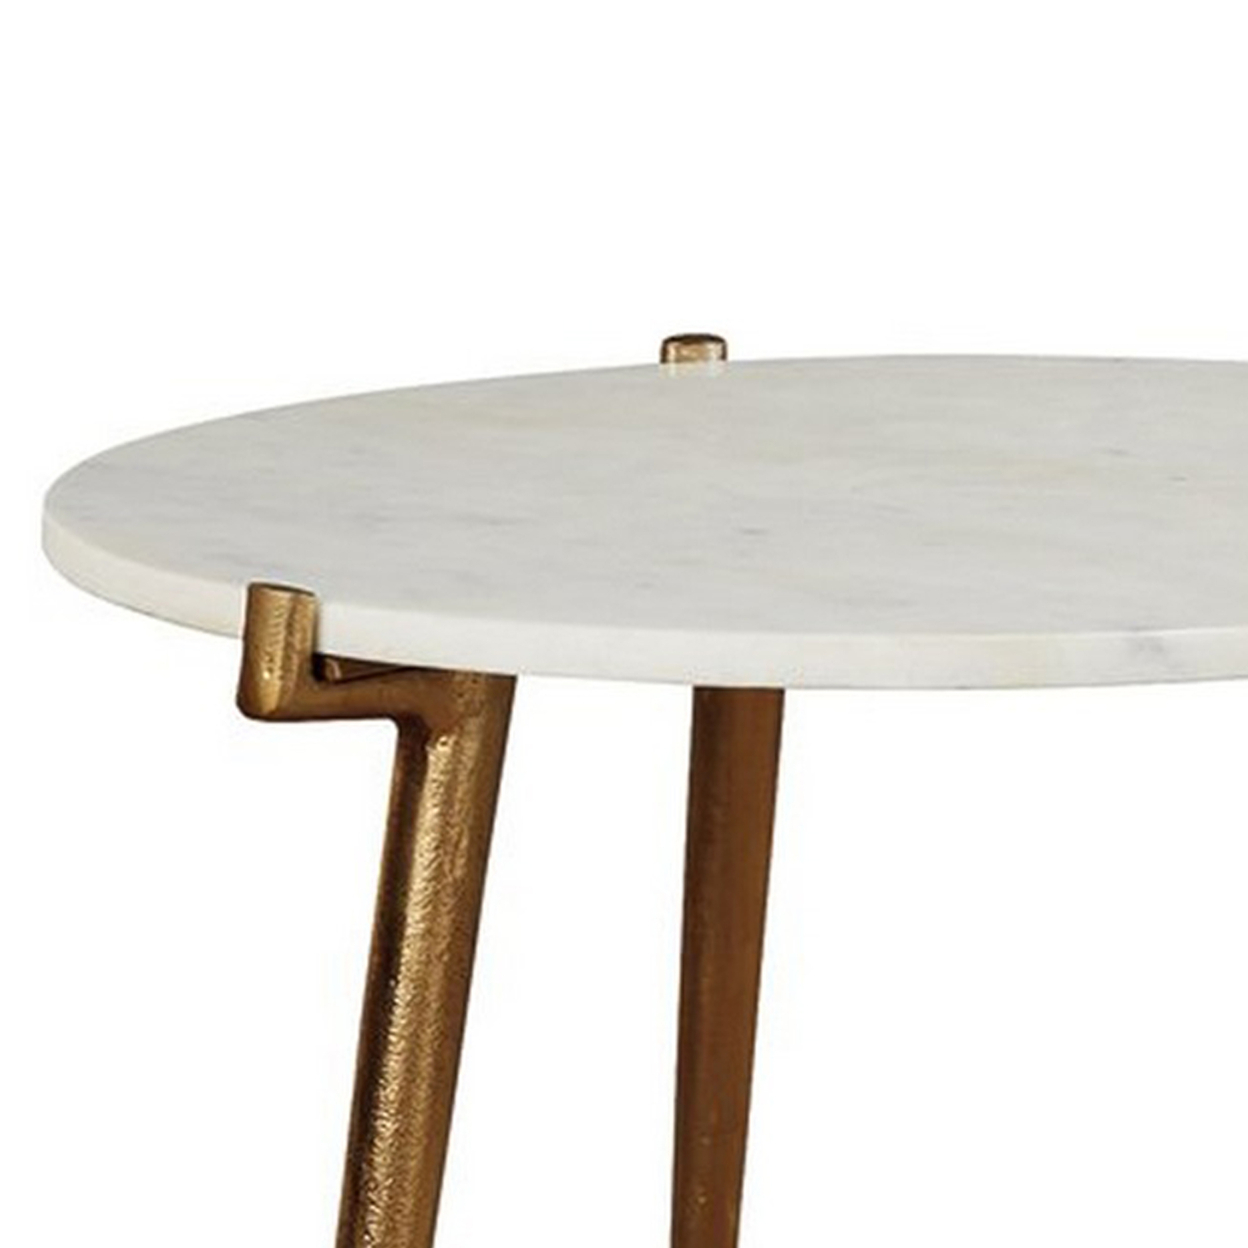 Round Marble Top Accent Table With Angled Metal Legs, Gold And White- Saltoro Sherpi